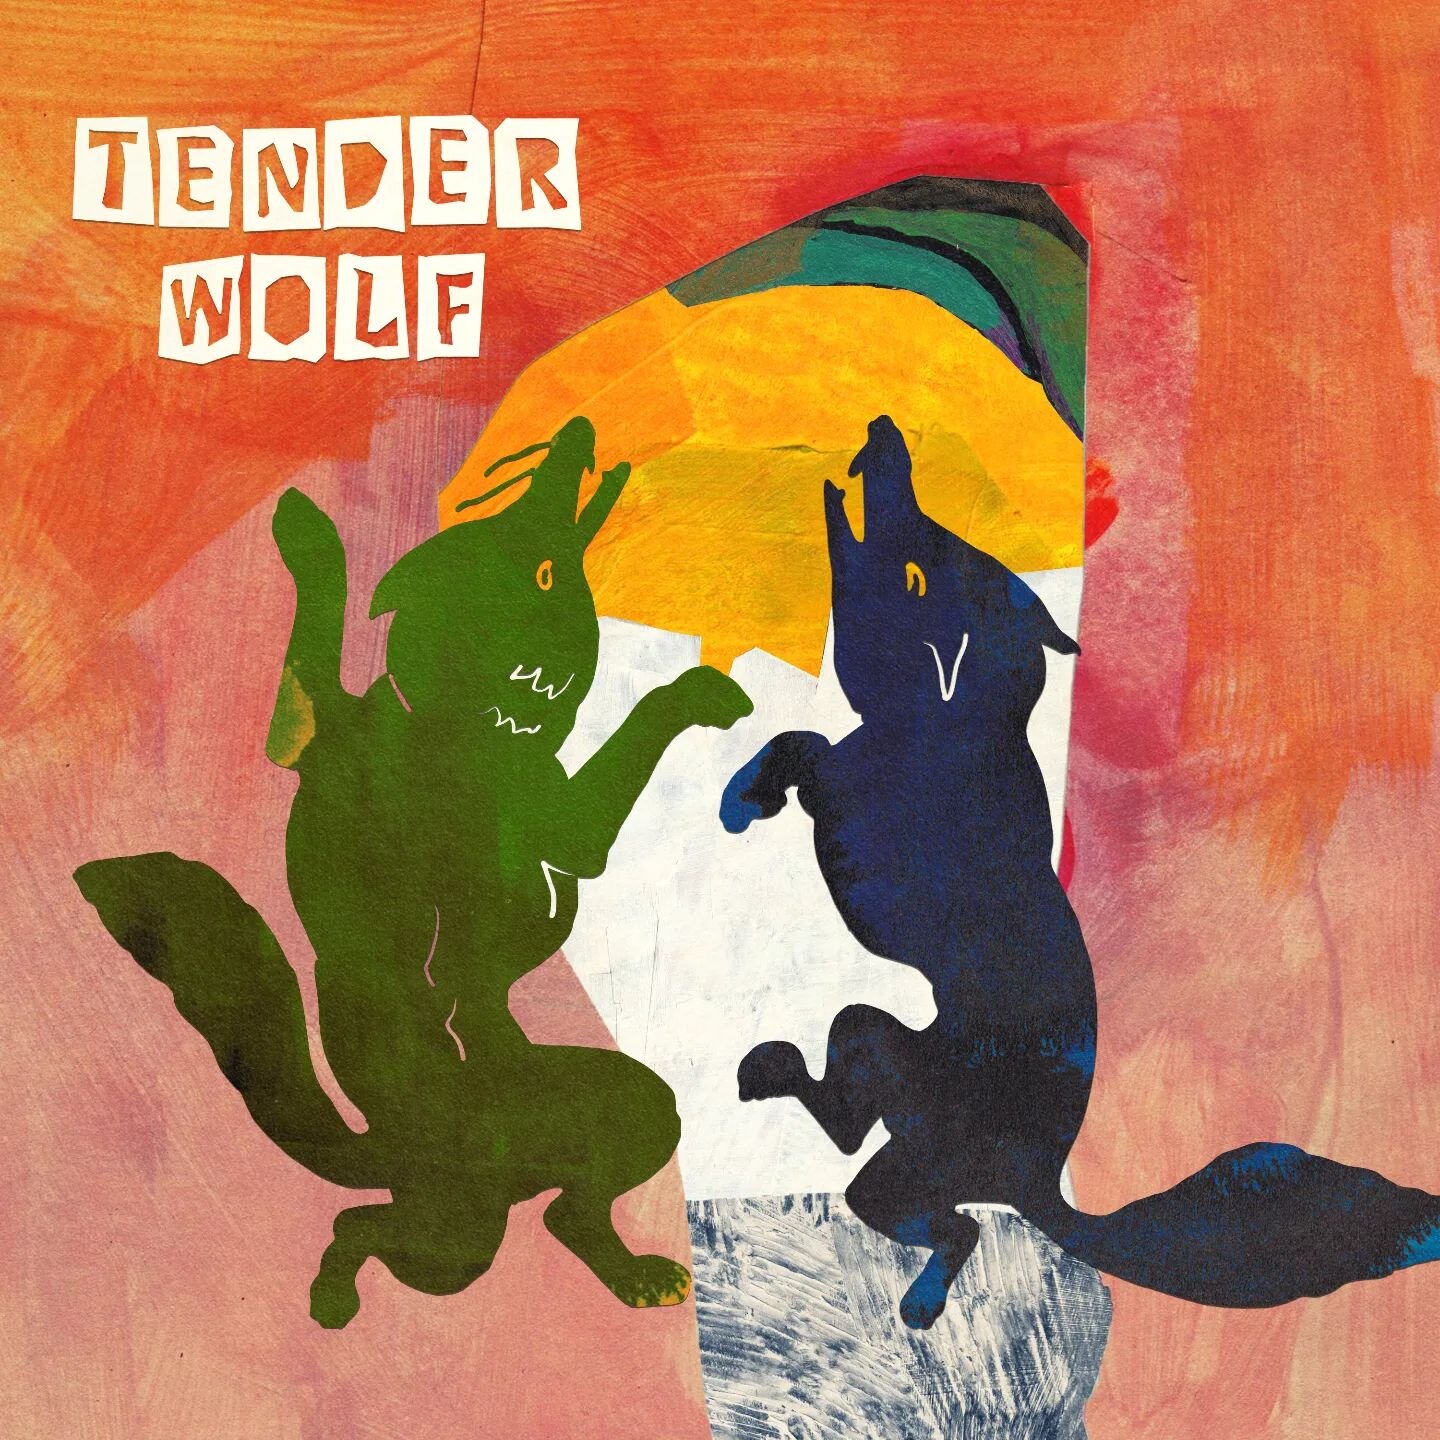 🐺 and we have EP artwork 🐺

This sick album art was created by the multitalented @legionnaires_disease specifically for our EP, to be fully released later this year. Speaking of releases... 🤐

#tenderwolf #albumart #visualart #wolves #austinmusic 